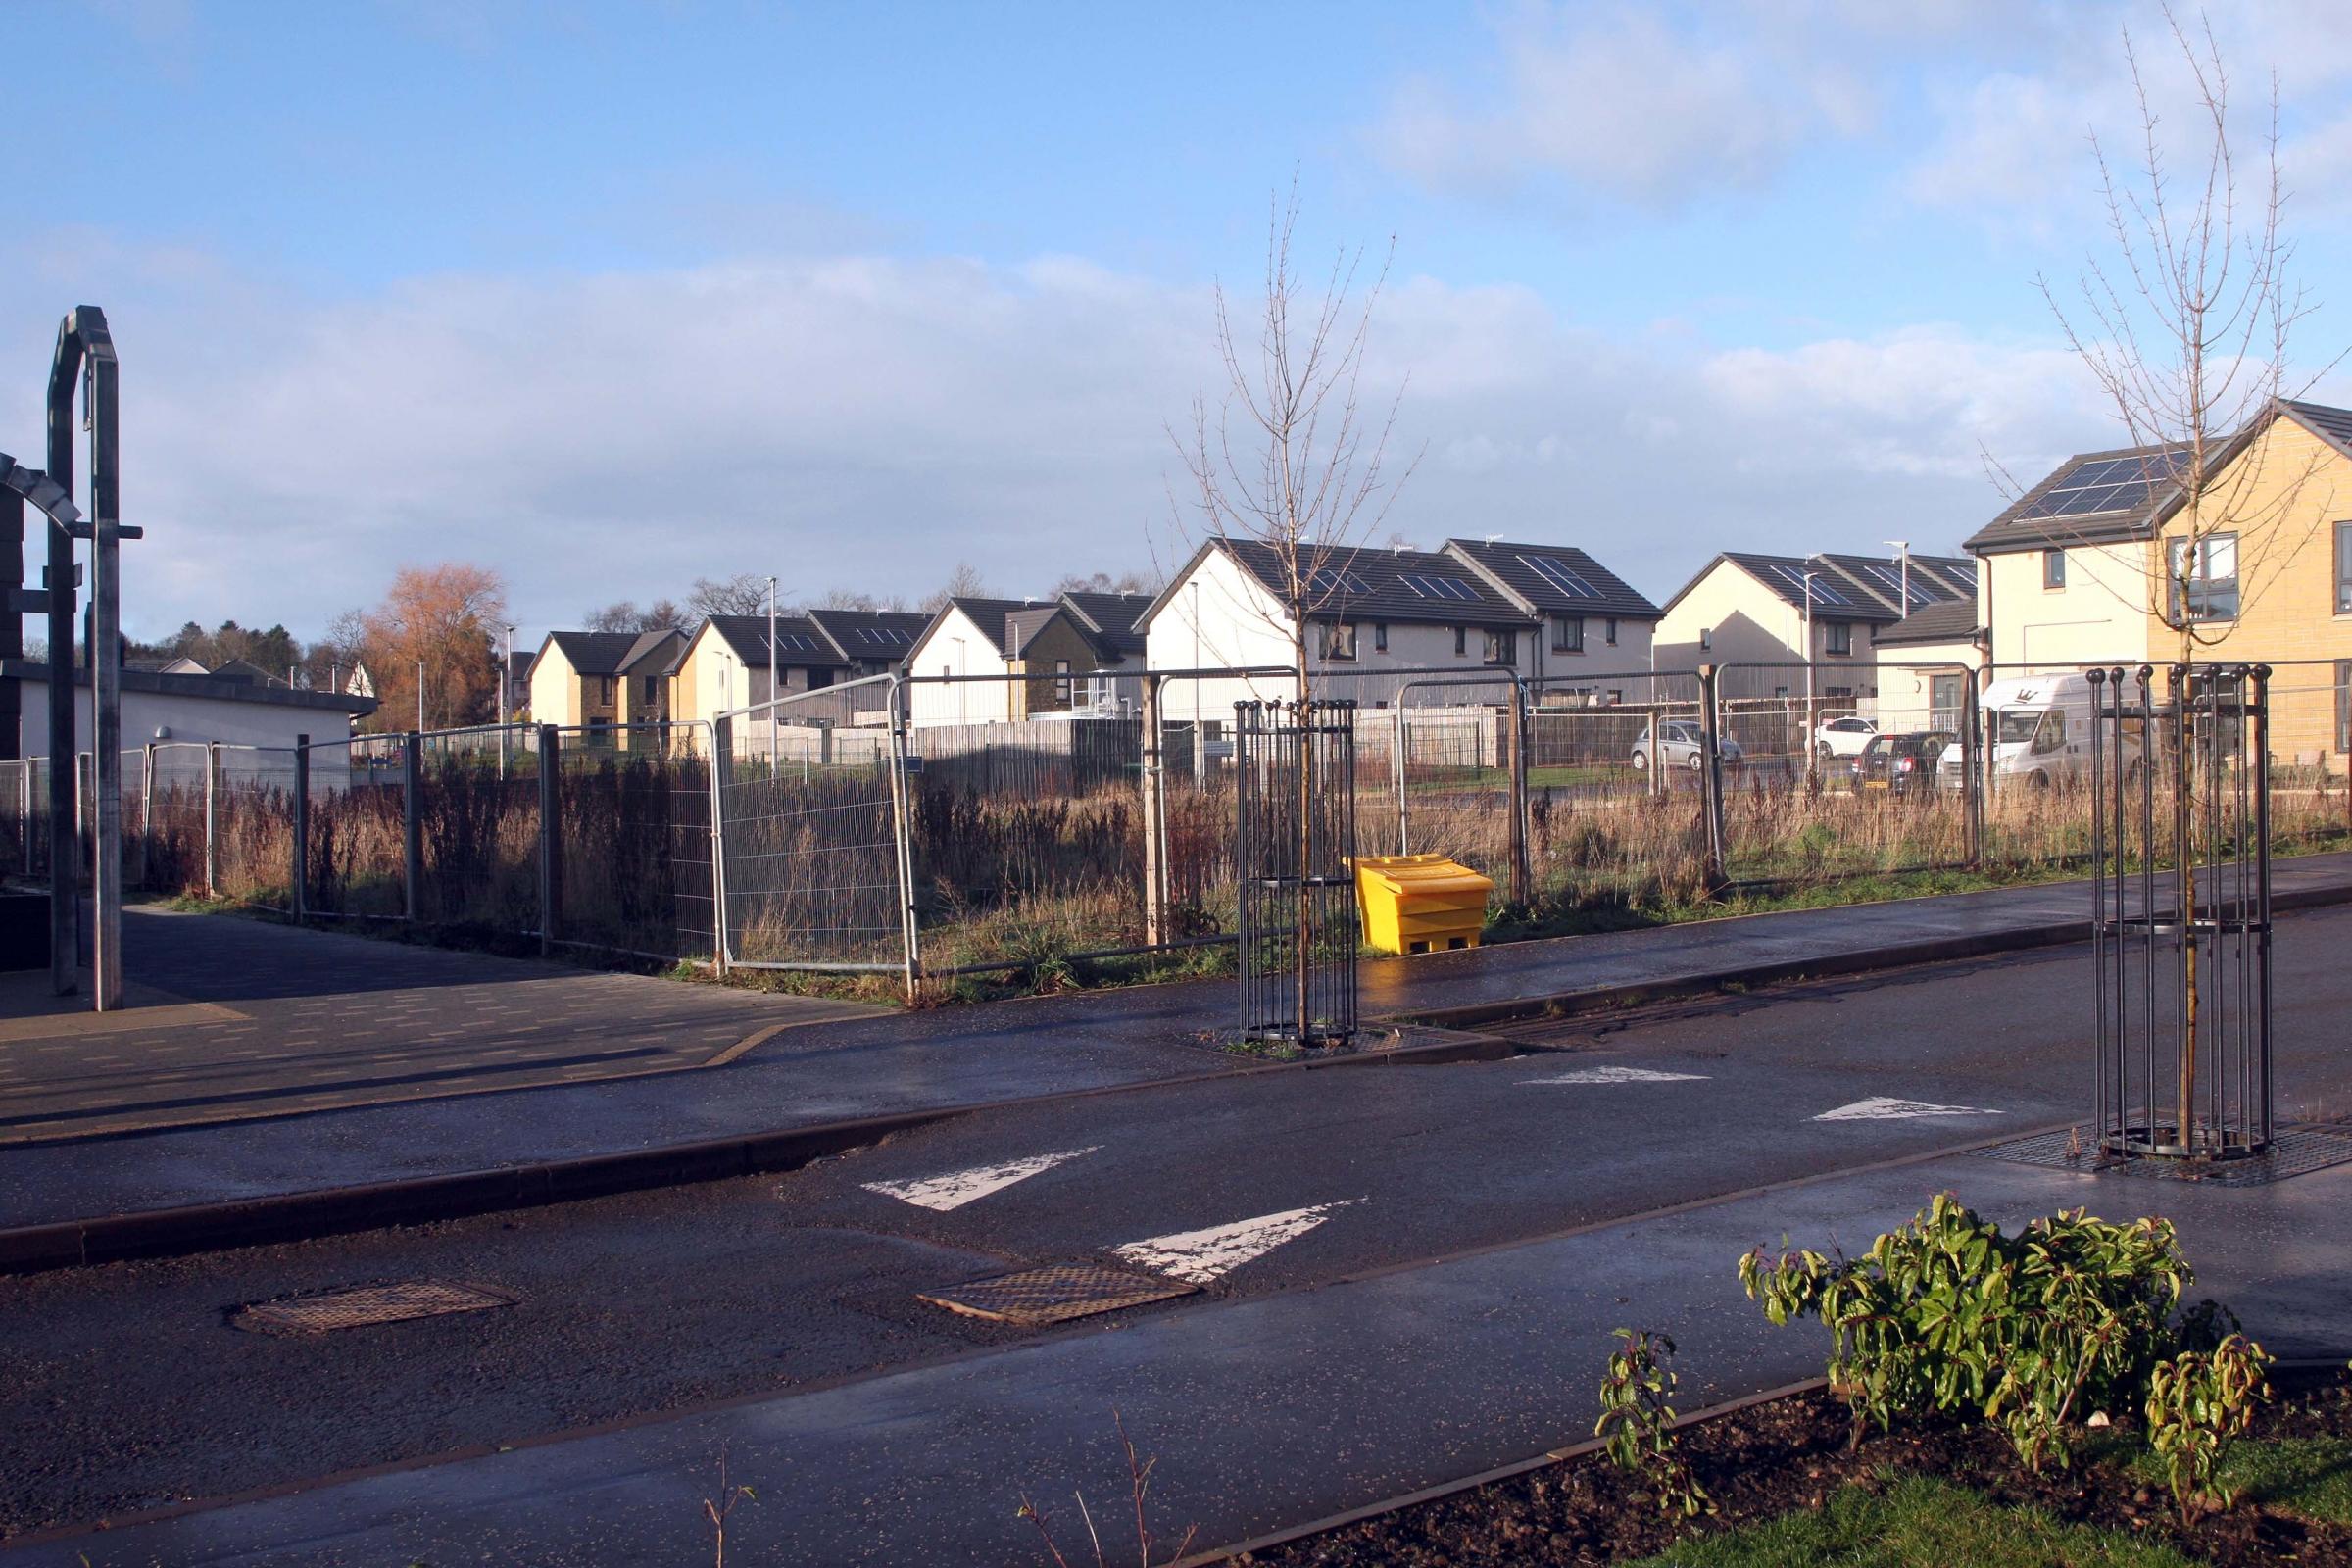 Plans for retail businesses and flats at Letham Mains in Haddington have been revamped.